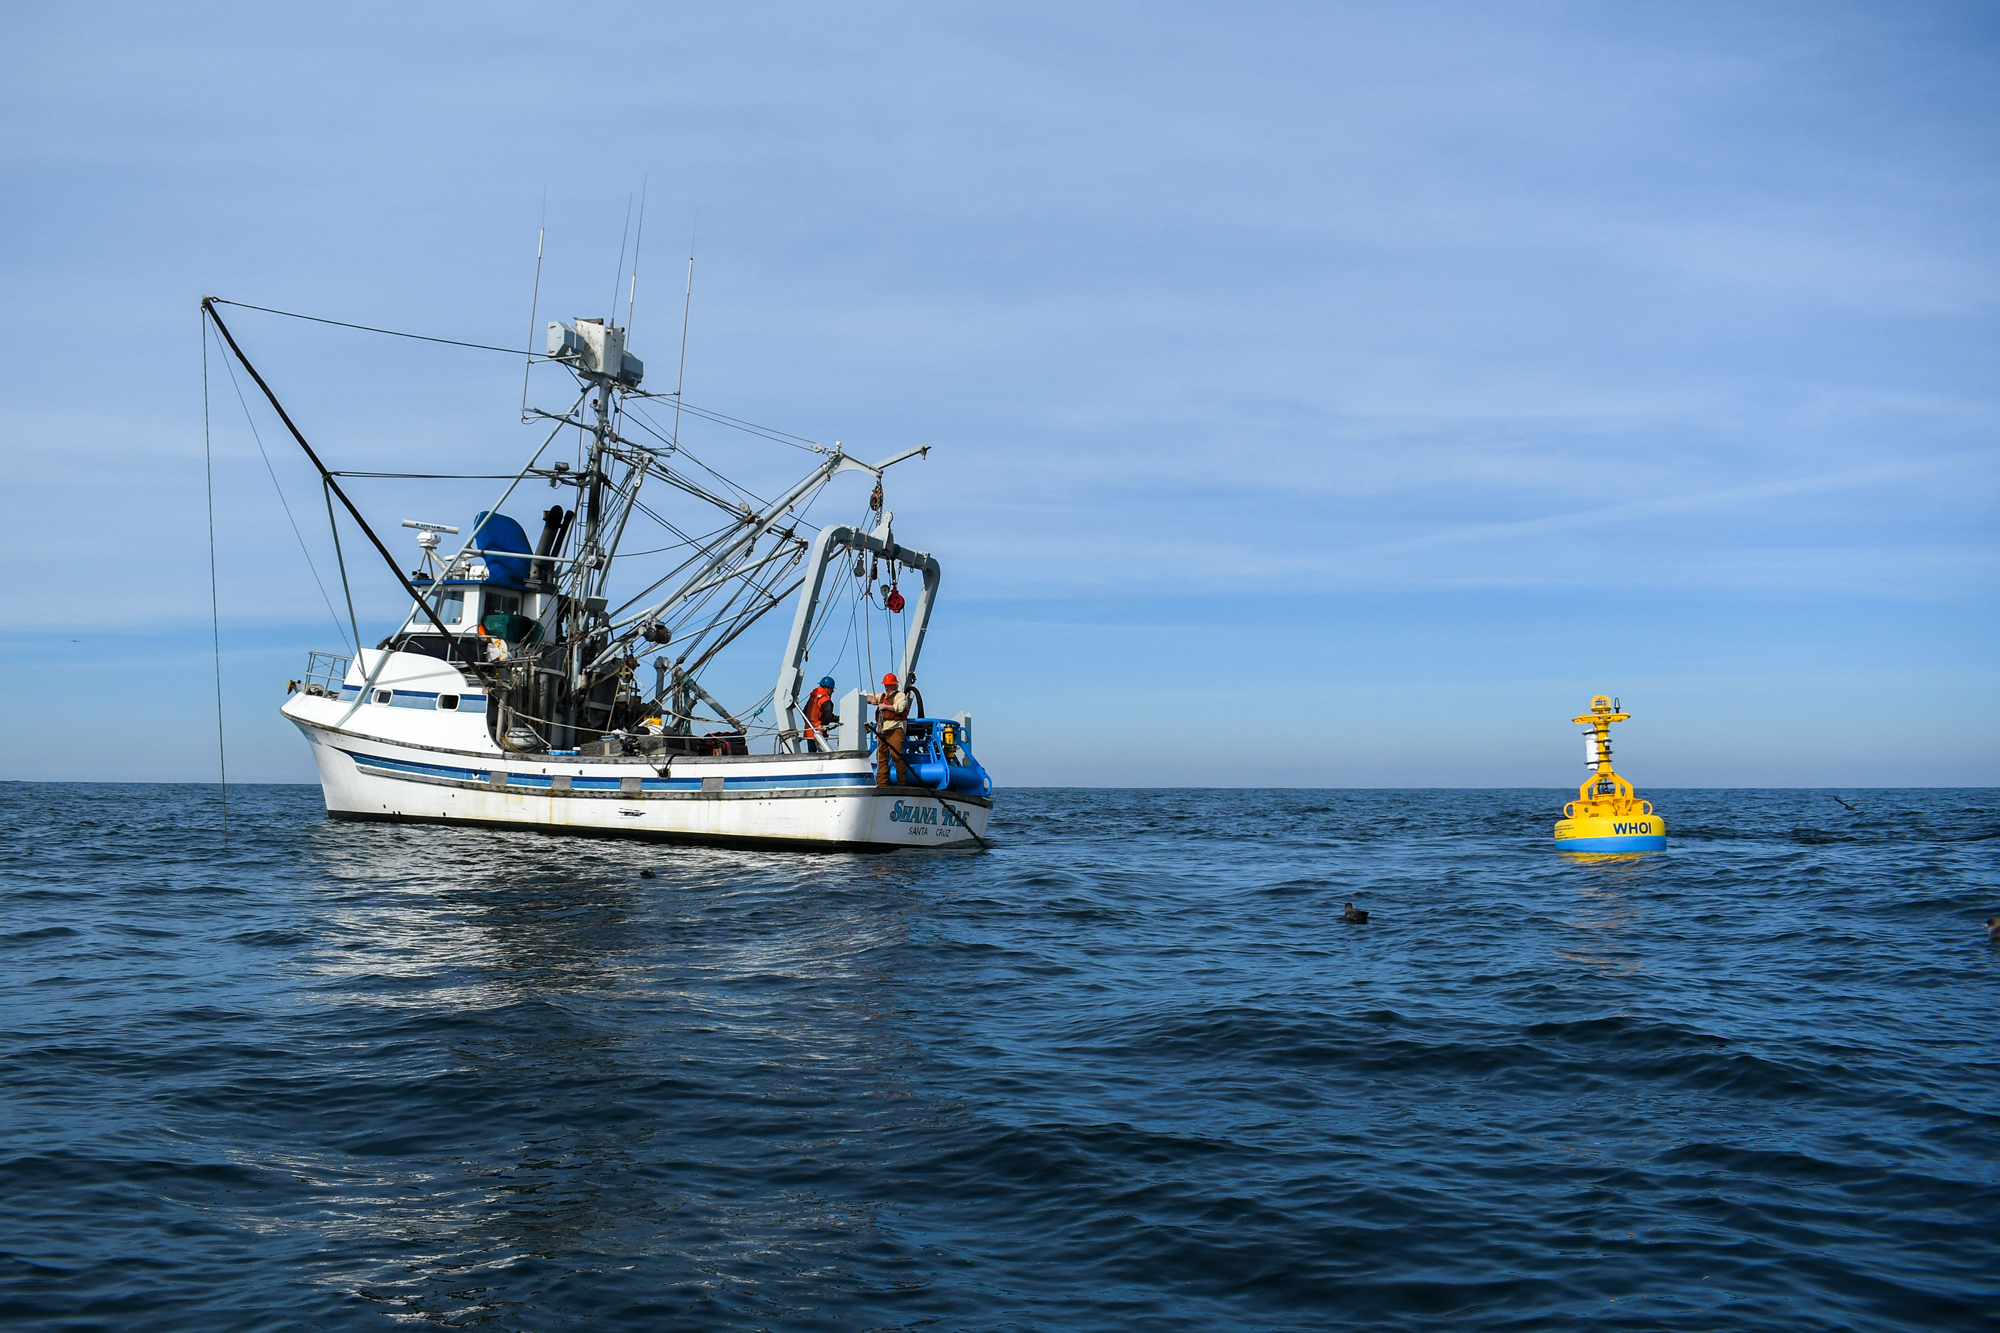 Scientists boat away, having dropped off an acoustic buoy used by Whale Safe in the San Francisco Bay